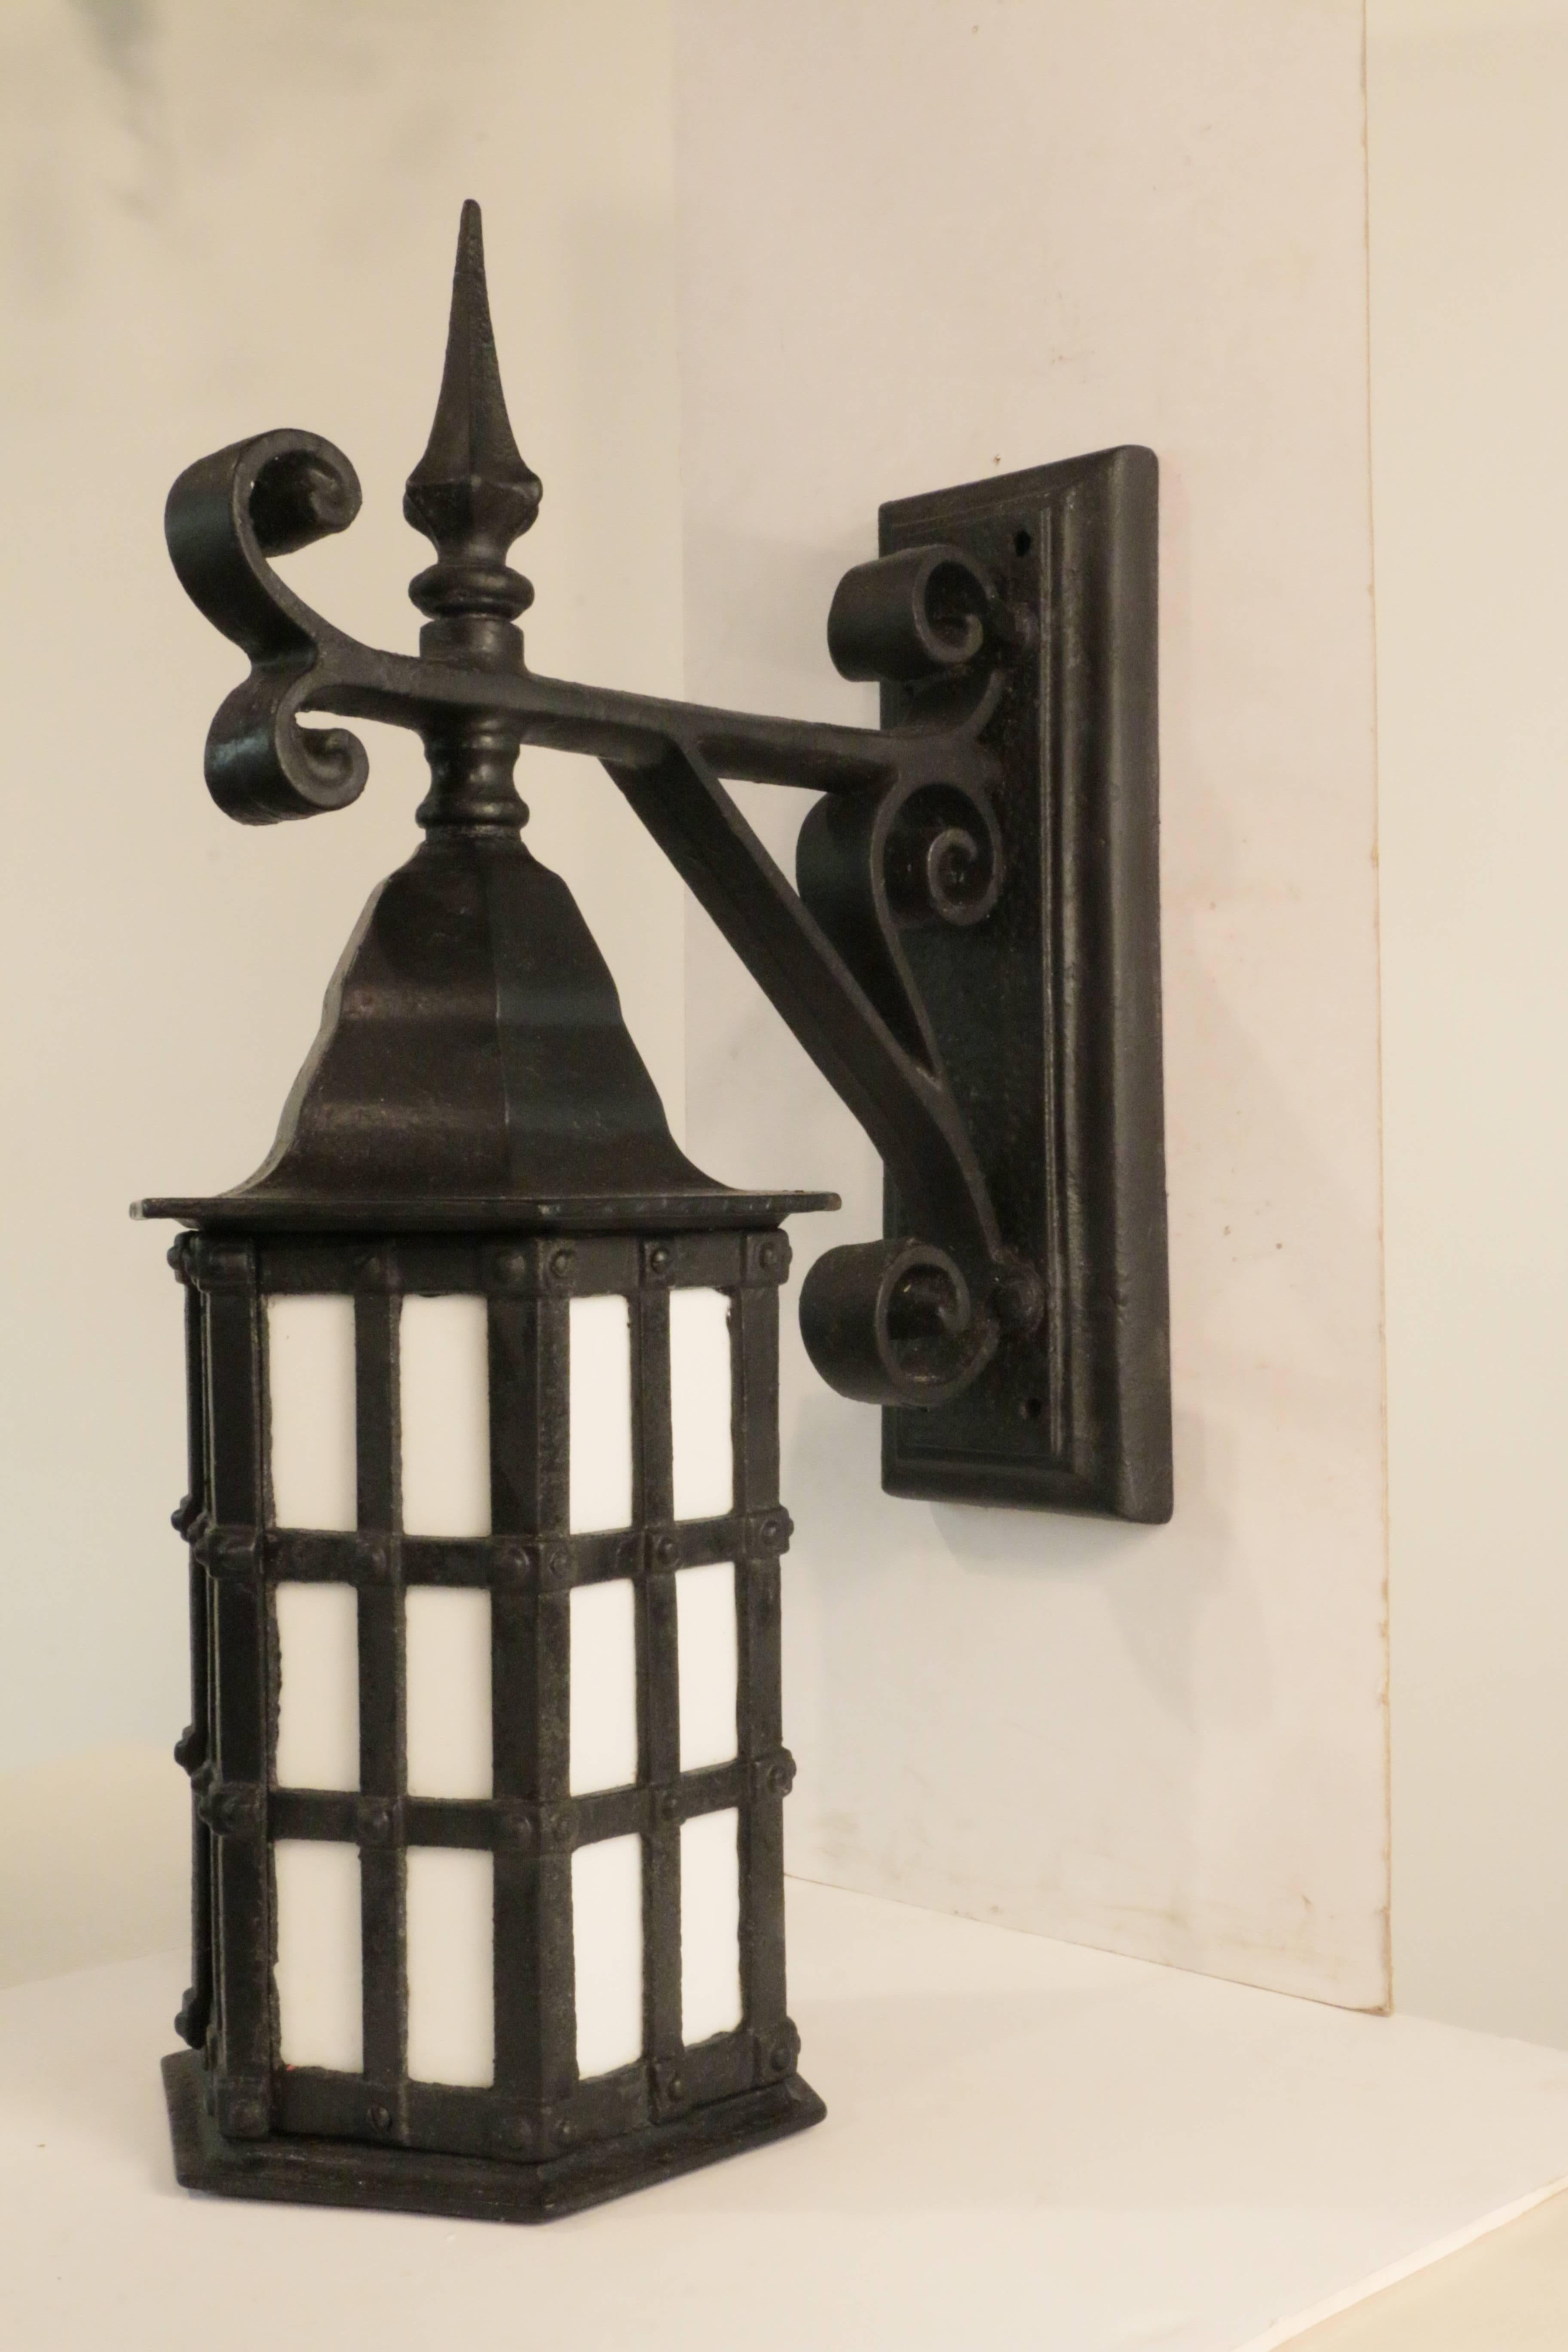 Pair of large cast iron exterior wall sconces,  each a glazed paneled six sided lantern,with conical hood and pointed finial, supported by scrolling braced arm extending from raised rectangular backplate.
American, circa 1900.